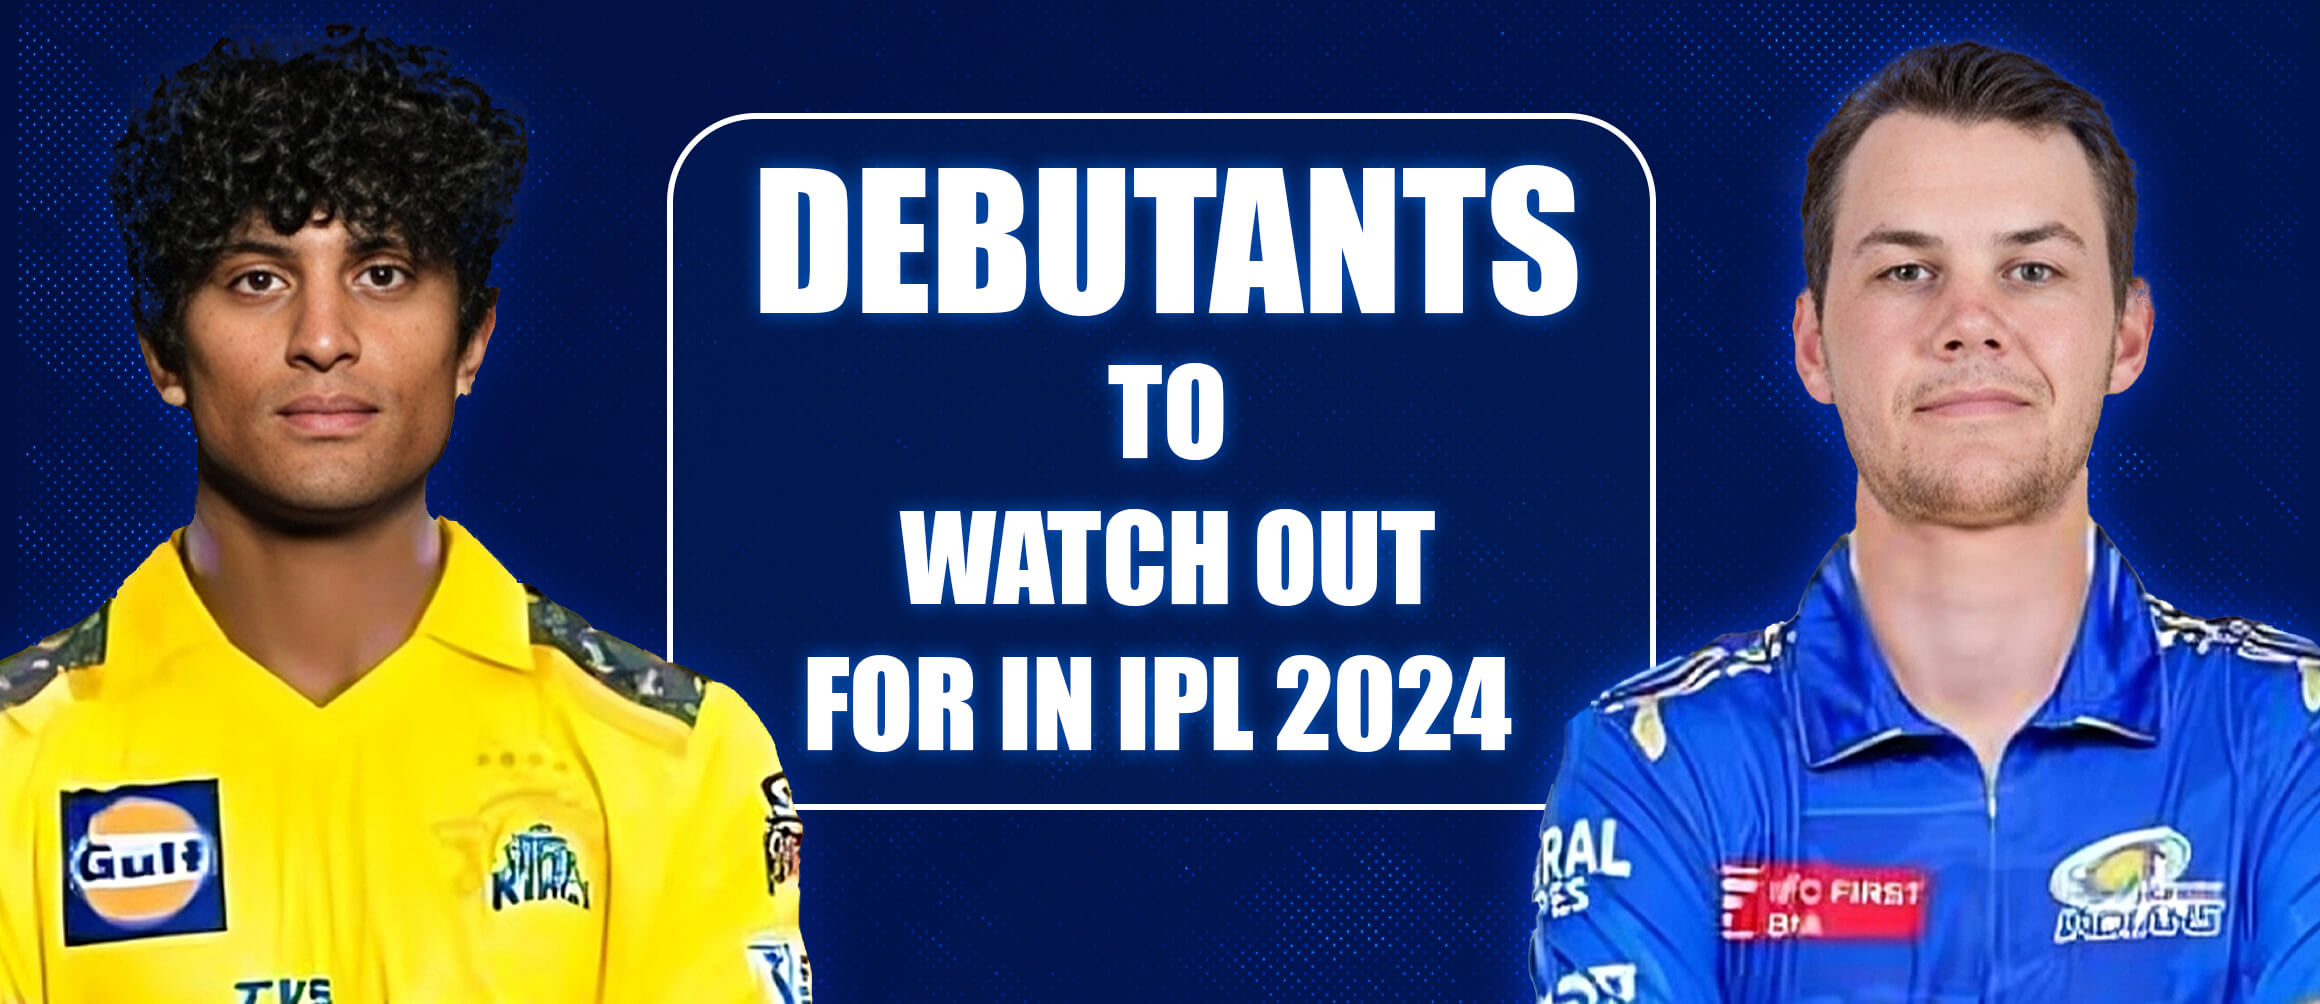 Debutants To Watch Out for In IPL 2024